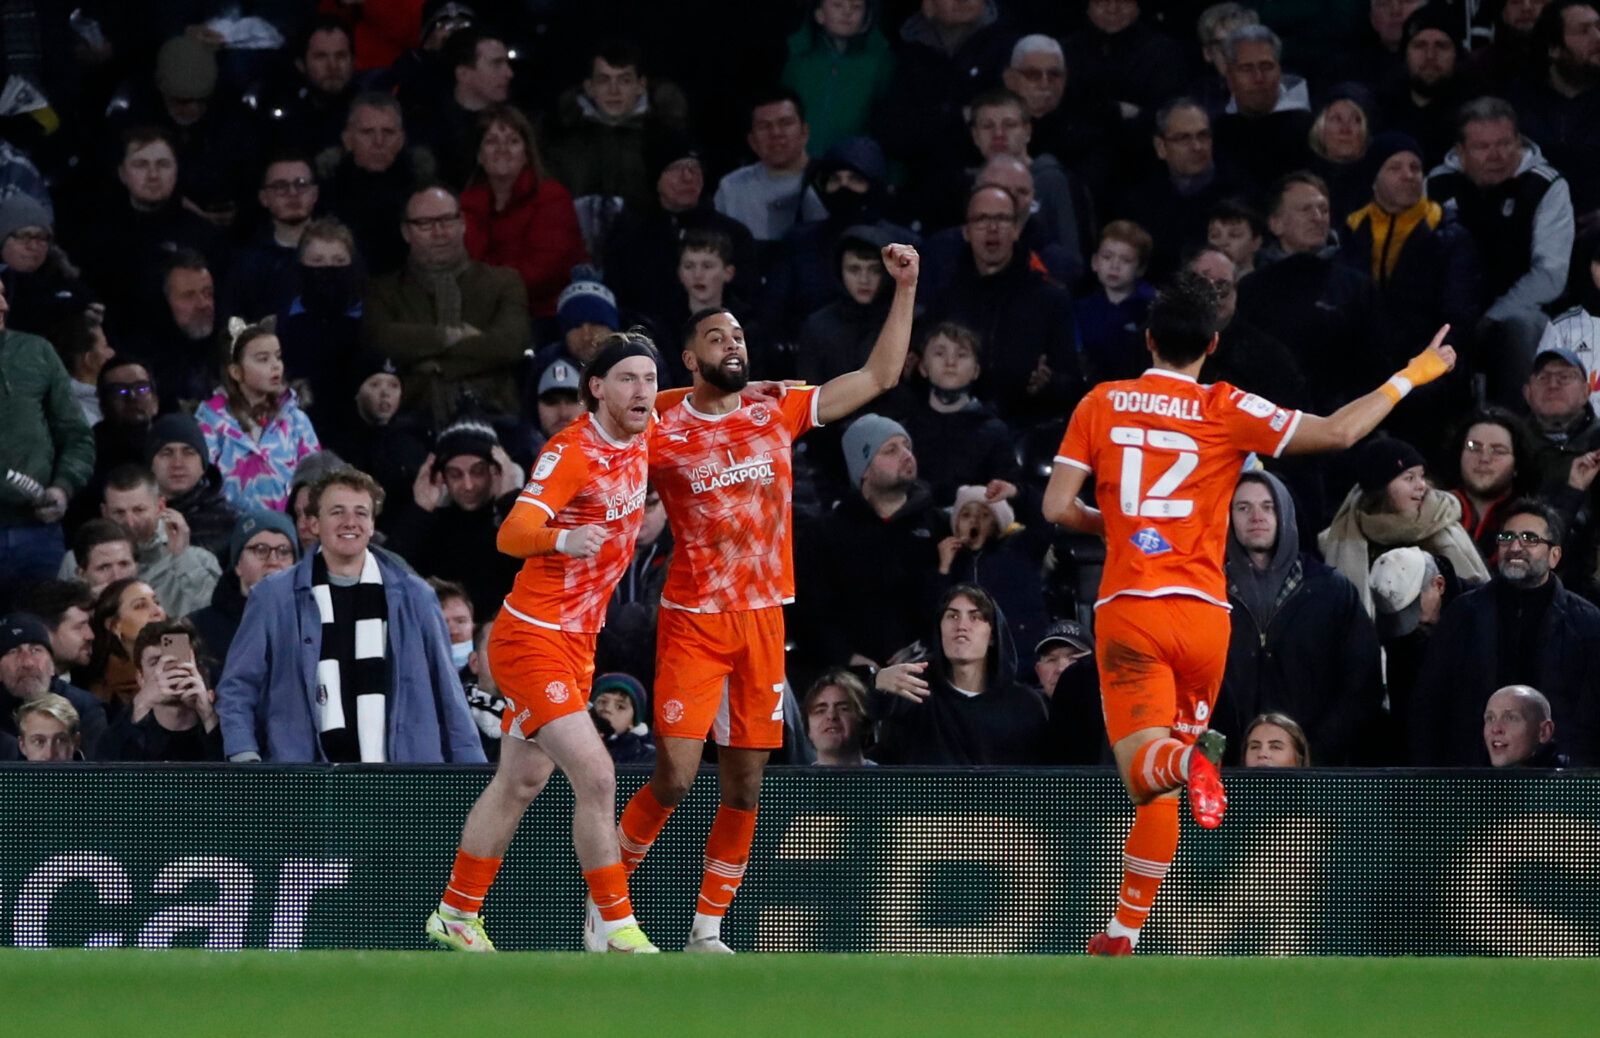 Soccer Football - Championship - Fulham v Blackpool - Craven Cottage, London, Britain - January 29, 2022 Blackpool's Josh Bowler celebrates scoring their first goal with Christopher Hamilton Action Images/Paul Childs EDITORIAL USE ONLY. No use with unauthorized audio, video, data, fixture lists, club/league logos or 'live' services. Online in-match use limited to 75 images, no video emulation. No use in betting, games or single club /league/player publications.  Please contact your account repre